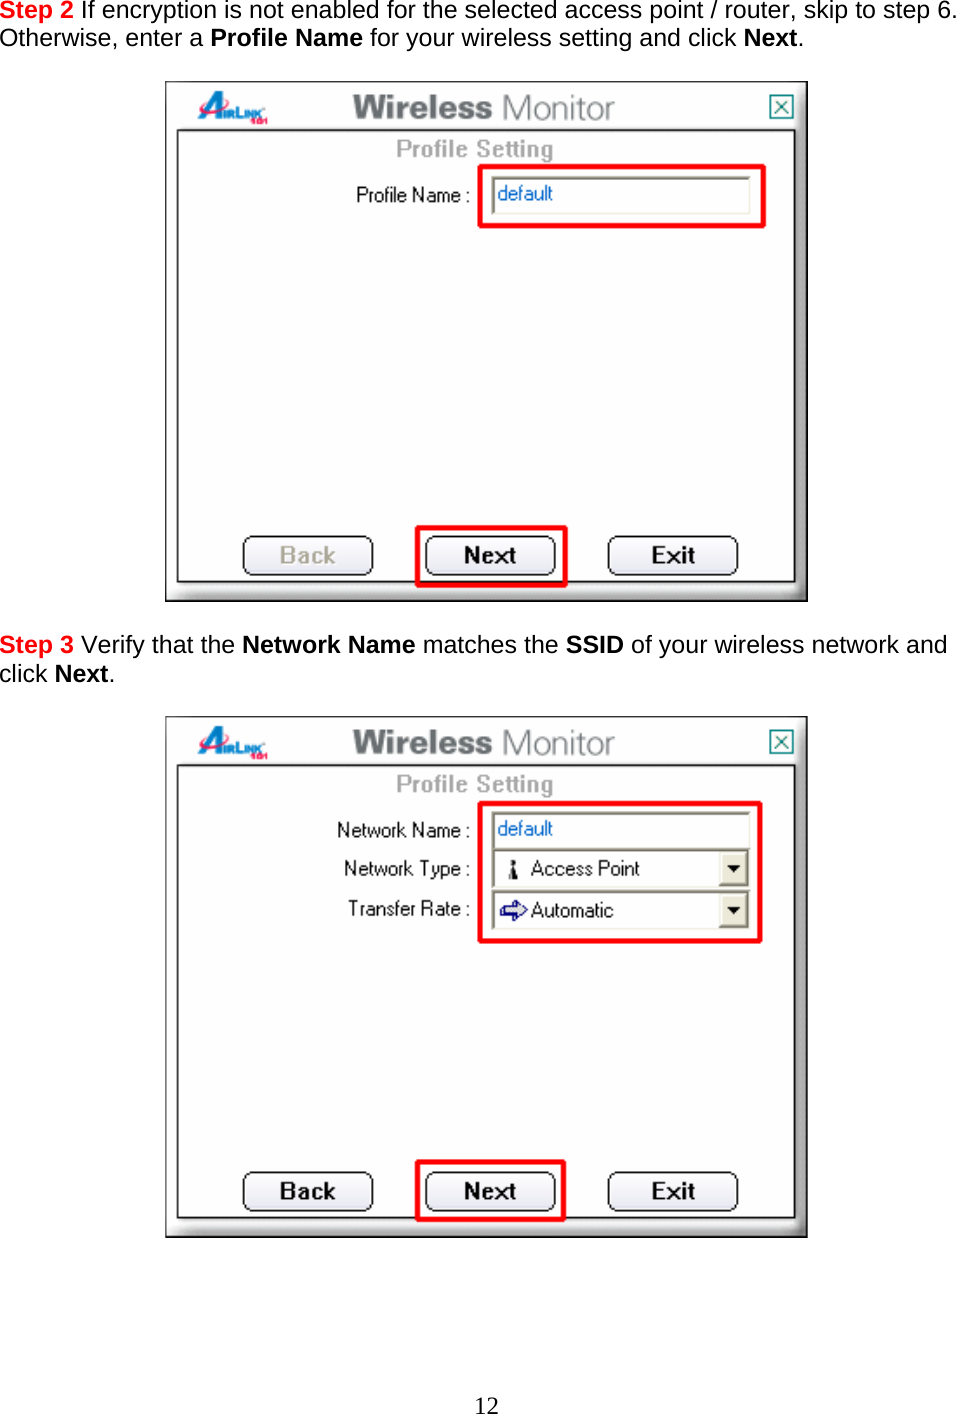 12 Step 2 If encryption is not enabled for the selected access point / router, skip to step 6. Otherwise, enter a Profile Name for your wireless setting and click Next.    Step 3 Verify that the Network Name matches the SSID of your wireless network and click Next.      